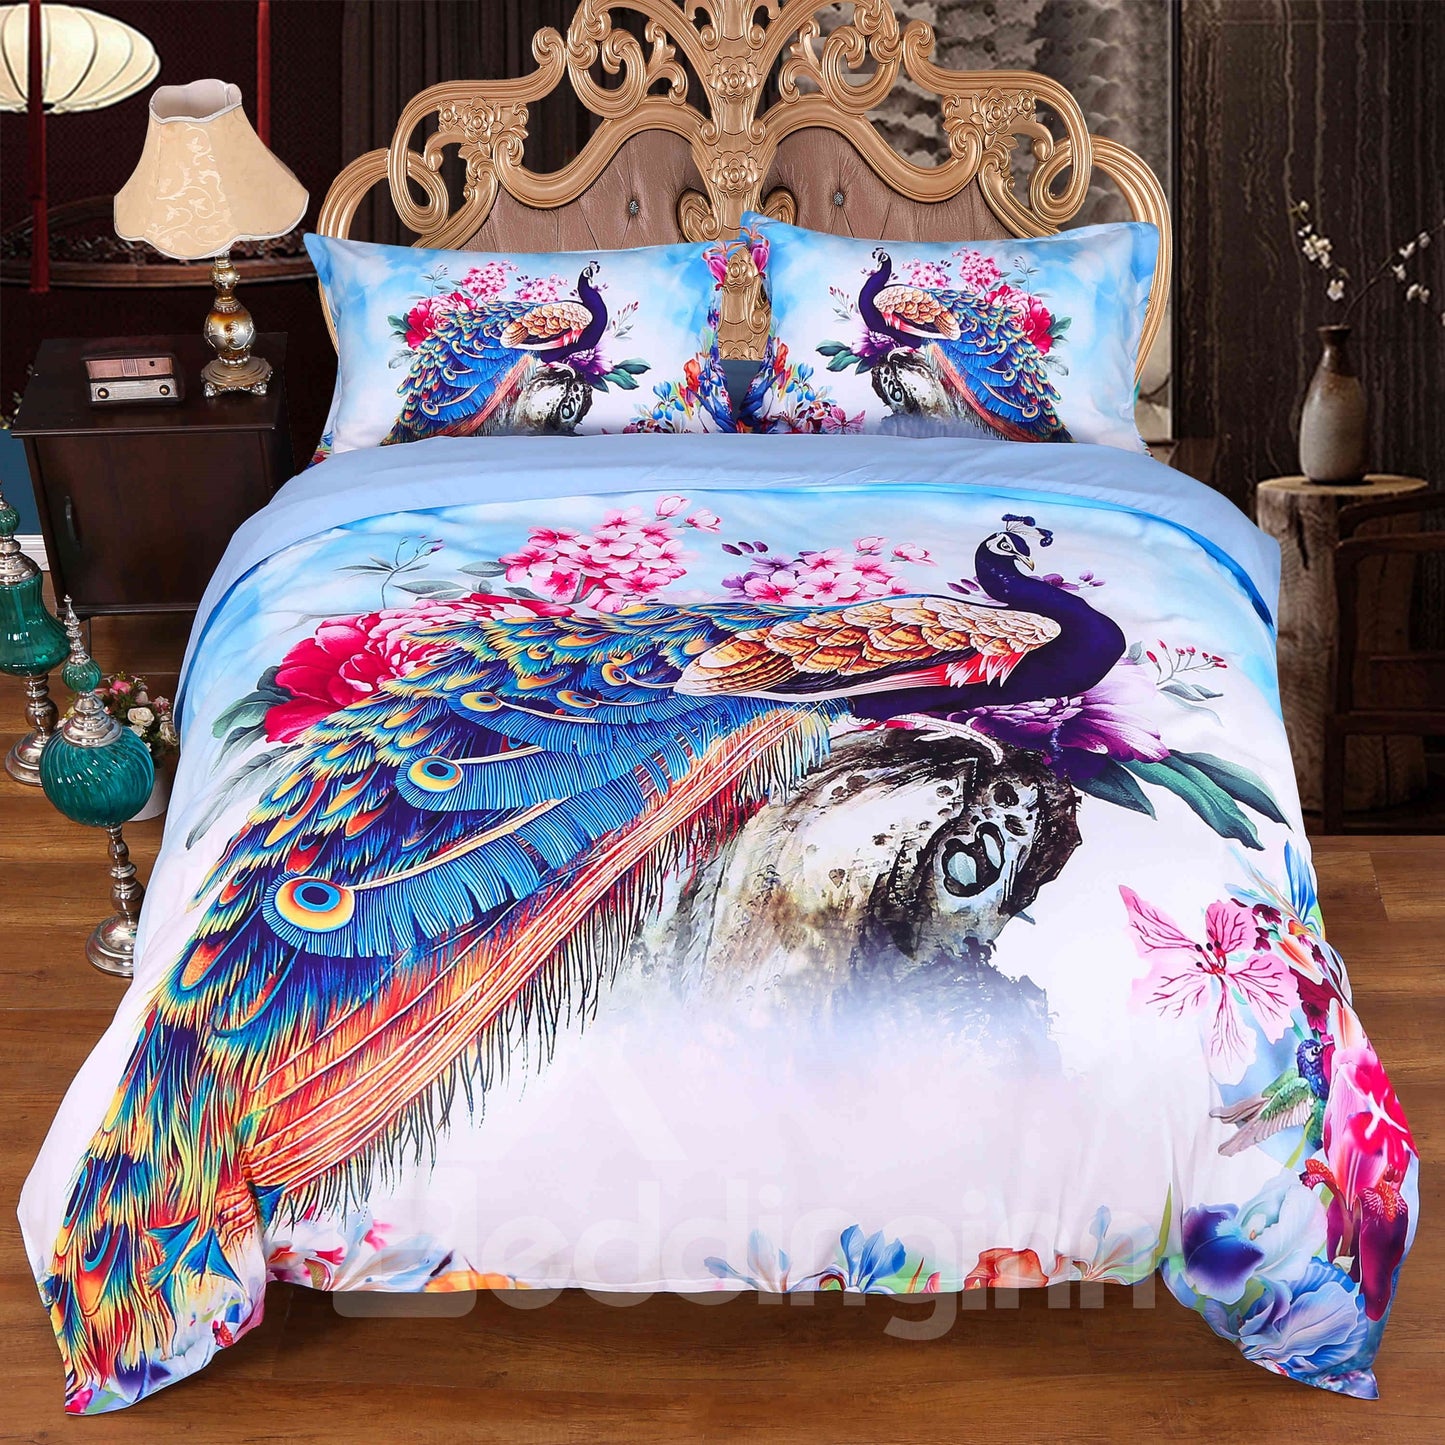 Peacock and Peony Watercolor Printed 3D 4-Piece Animal Print Duvet Cover Set/Bedding Set Blue